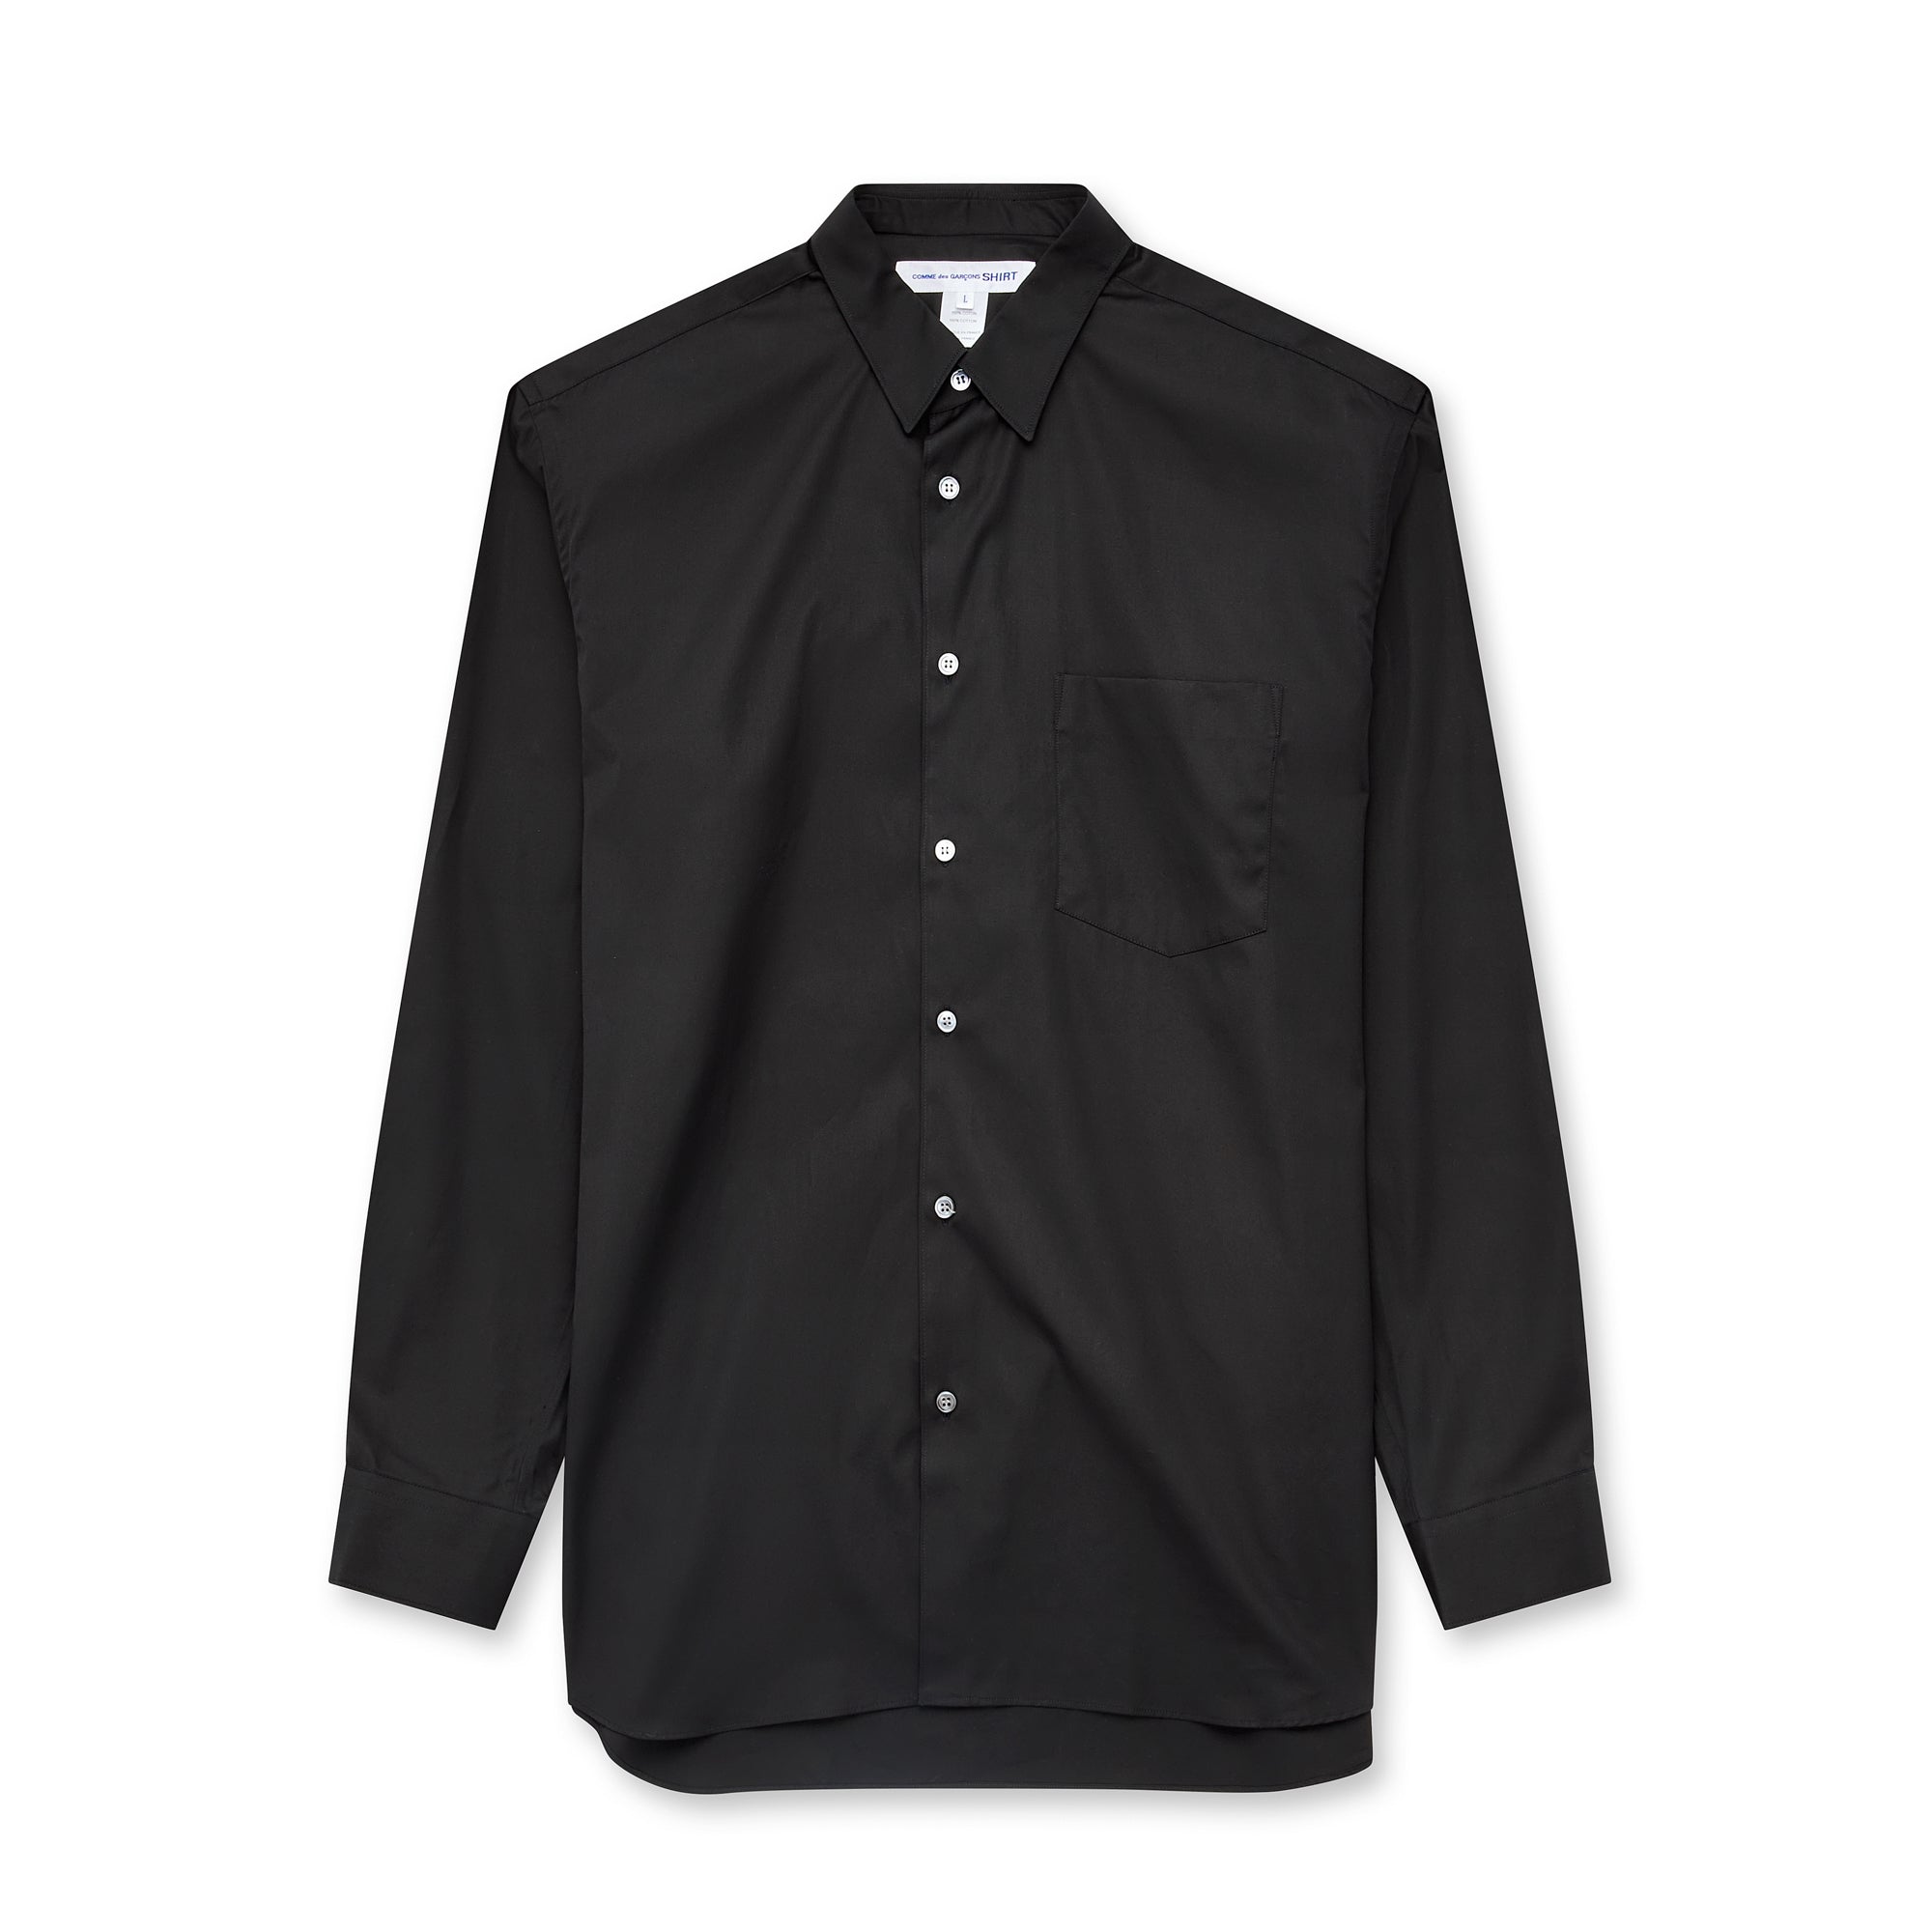 CDG Shirt Forever - Wide Fit Cotton Shirt - (Black) view 1